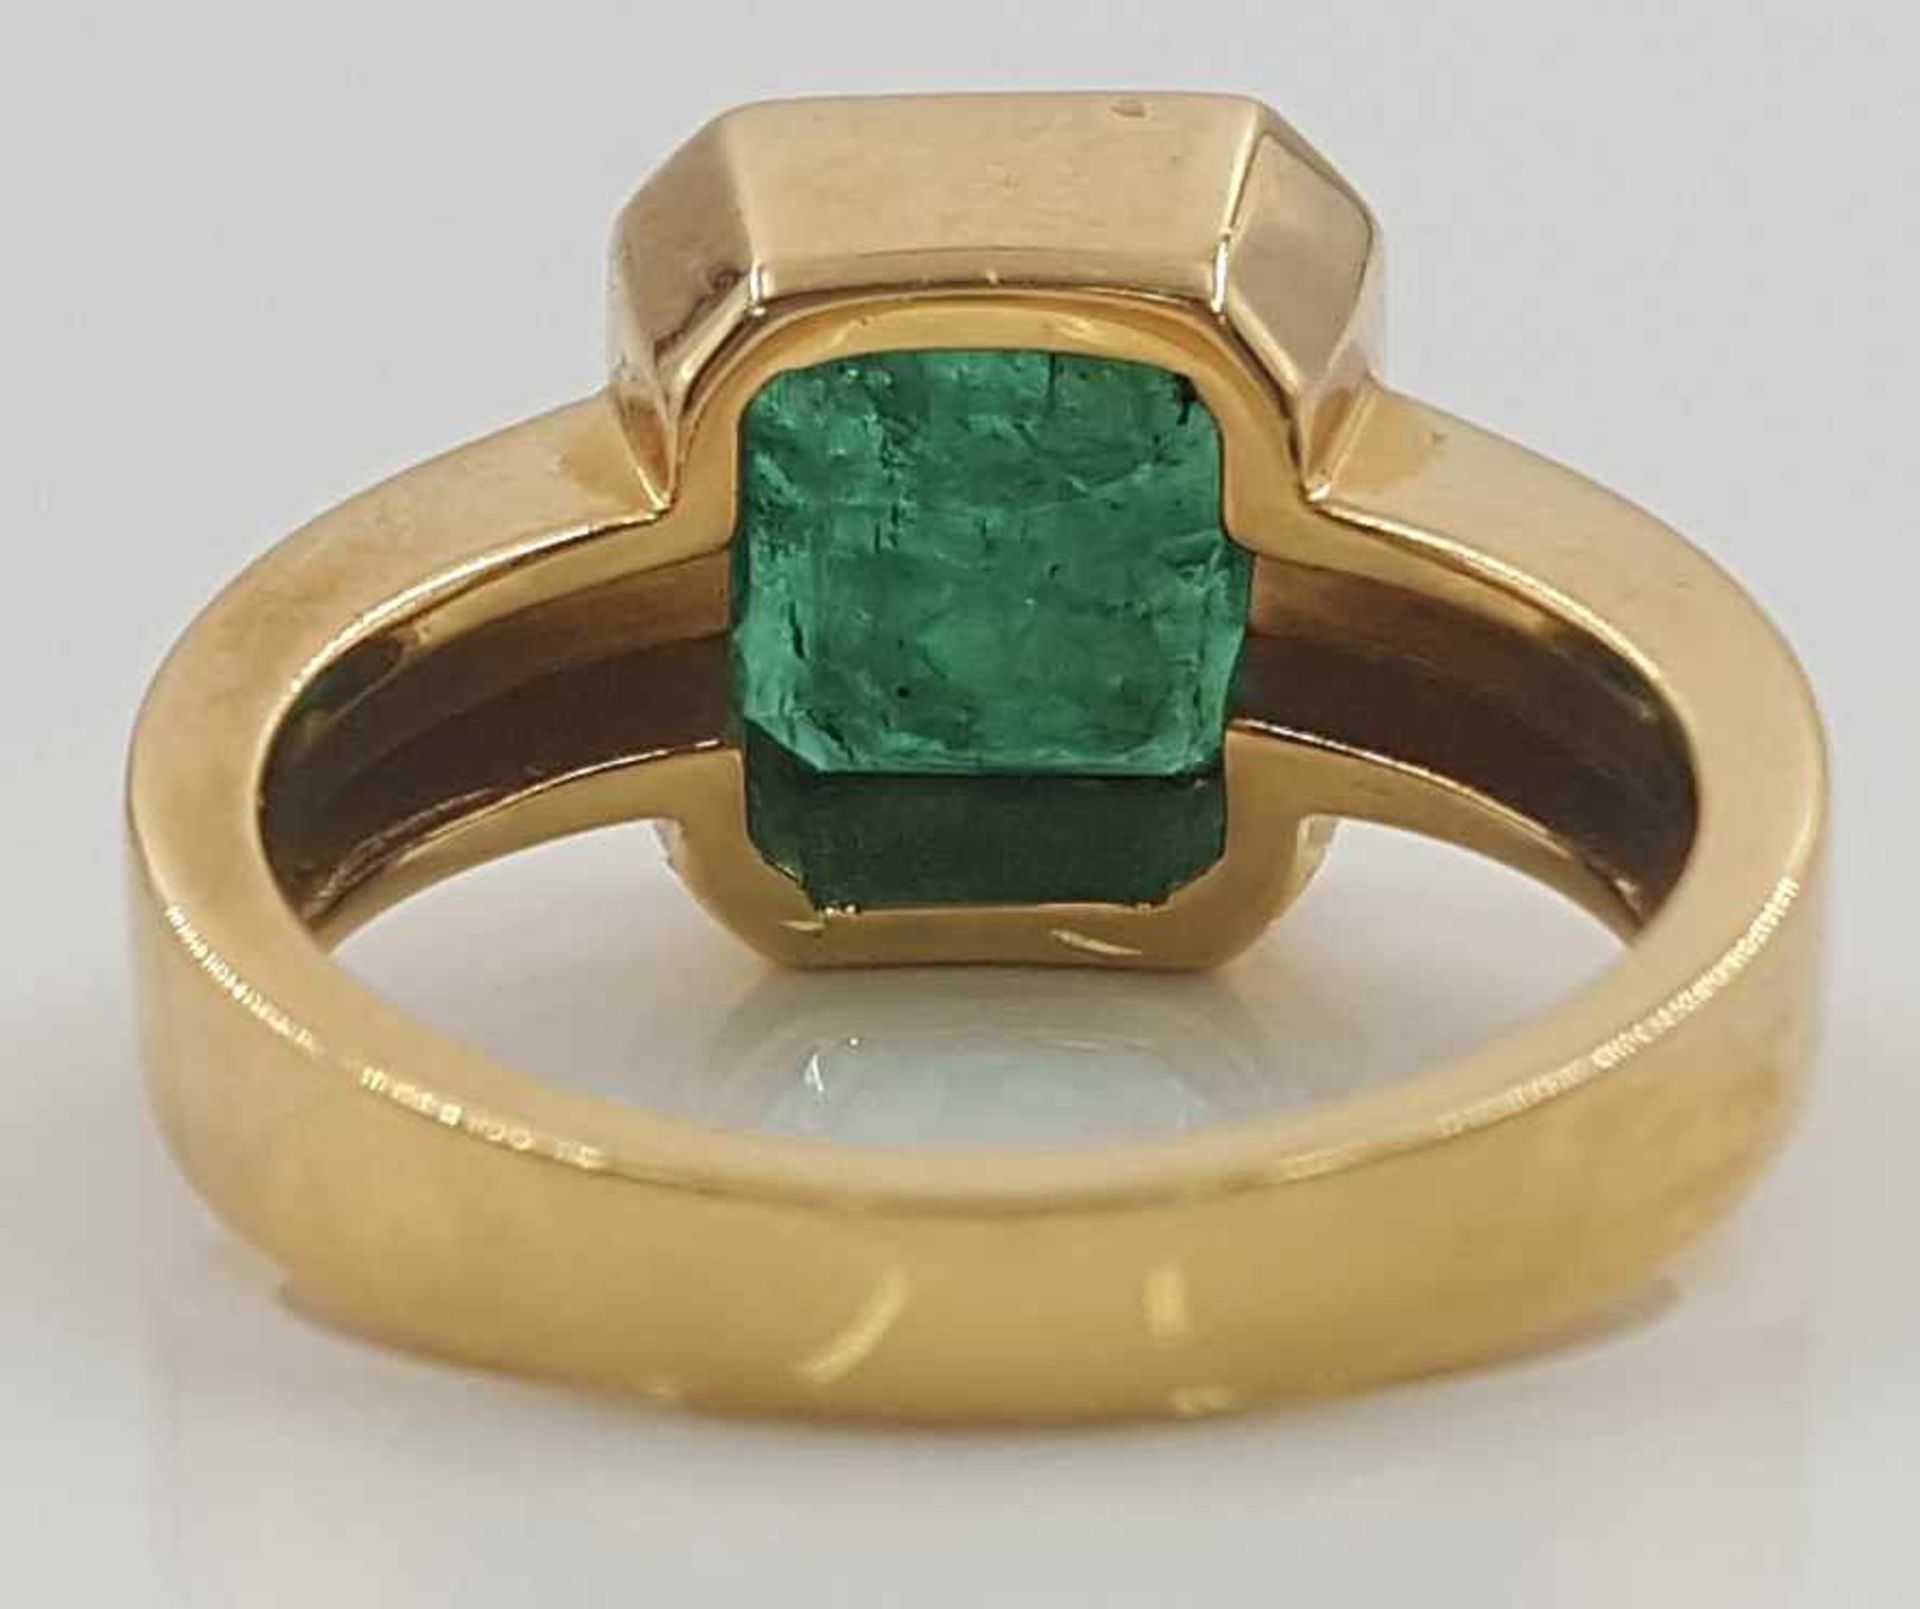 Emerald Ring, 750 Yellow Gold. The stone is circa 3 carats. - Image 2 of 5